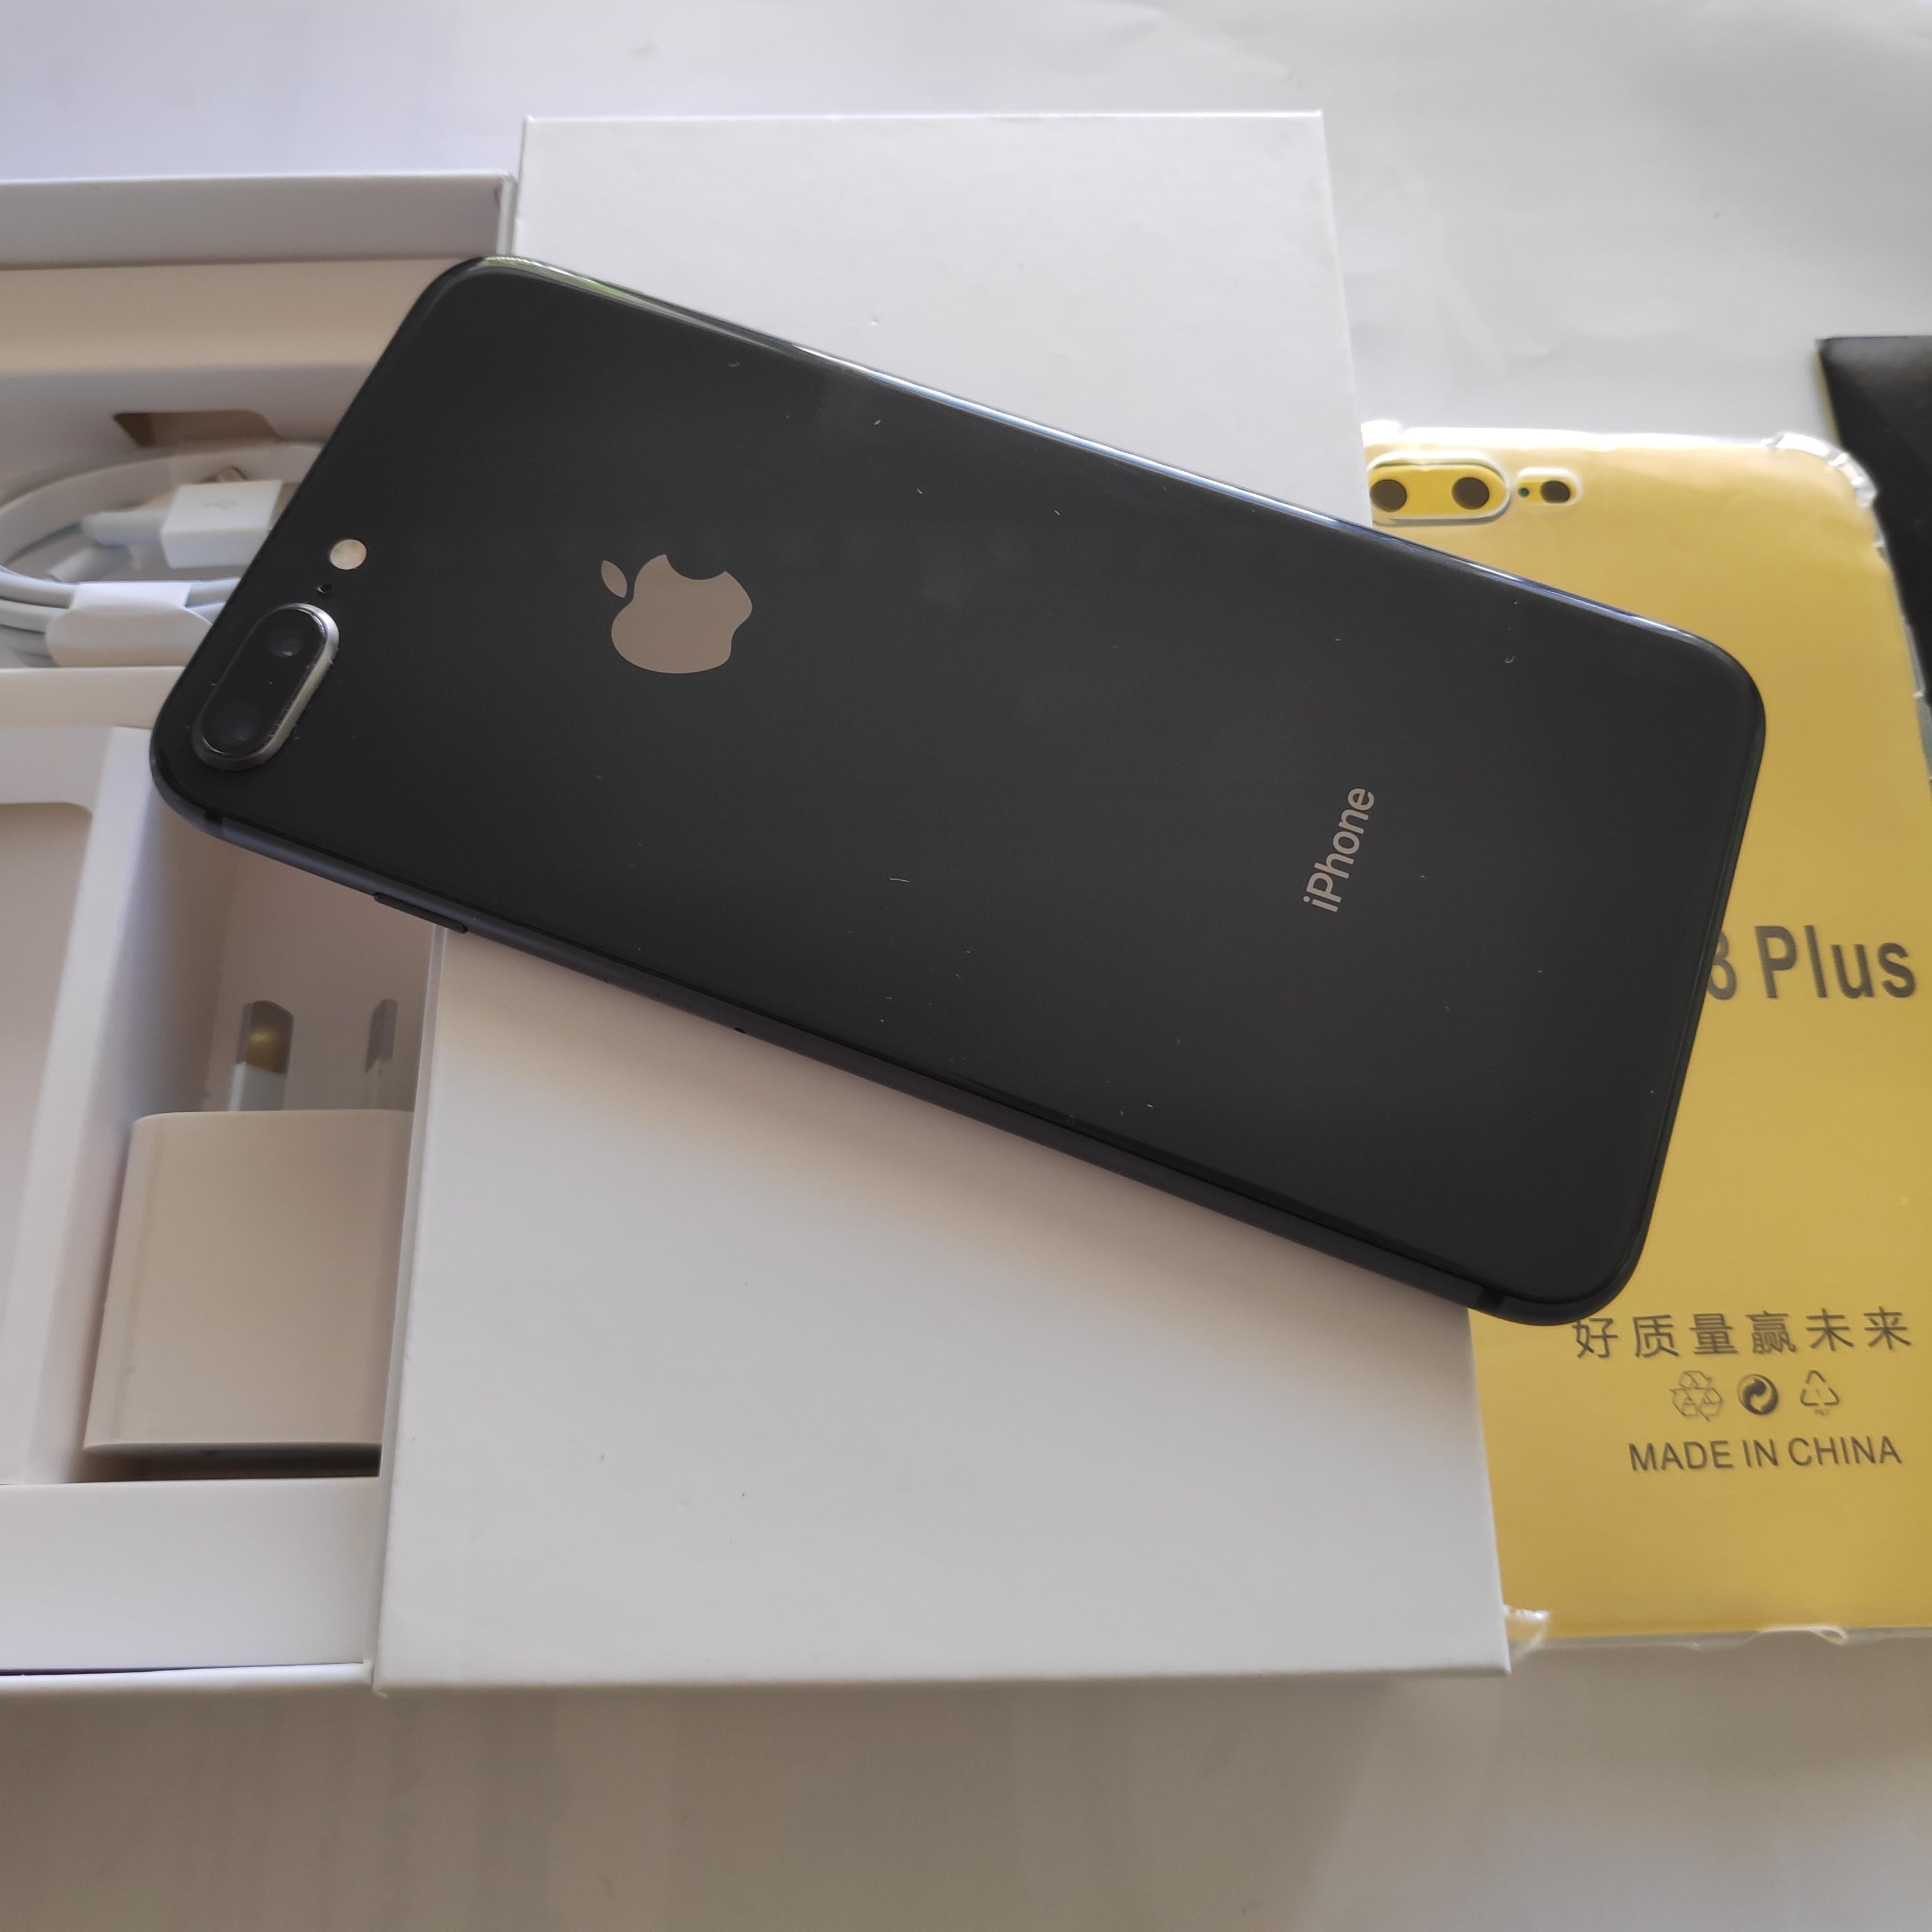 Apple iPhone 8 Plus 64GB Space Grey (Excellent) New Case, Screen Protector & Shipping